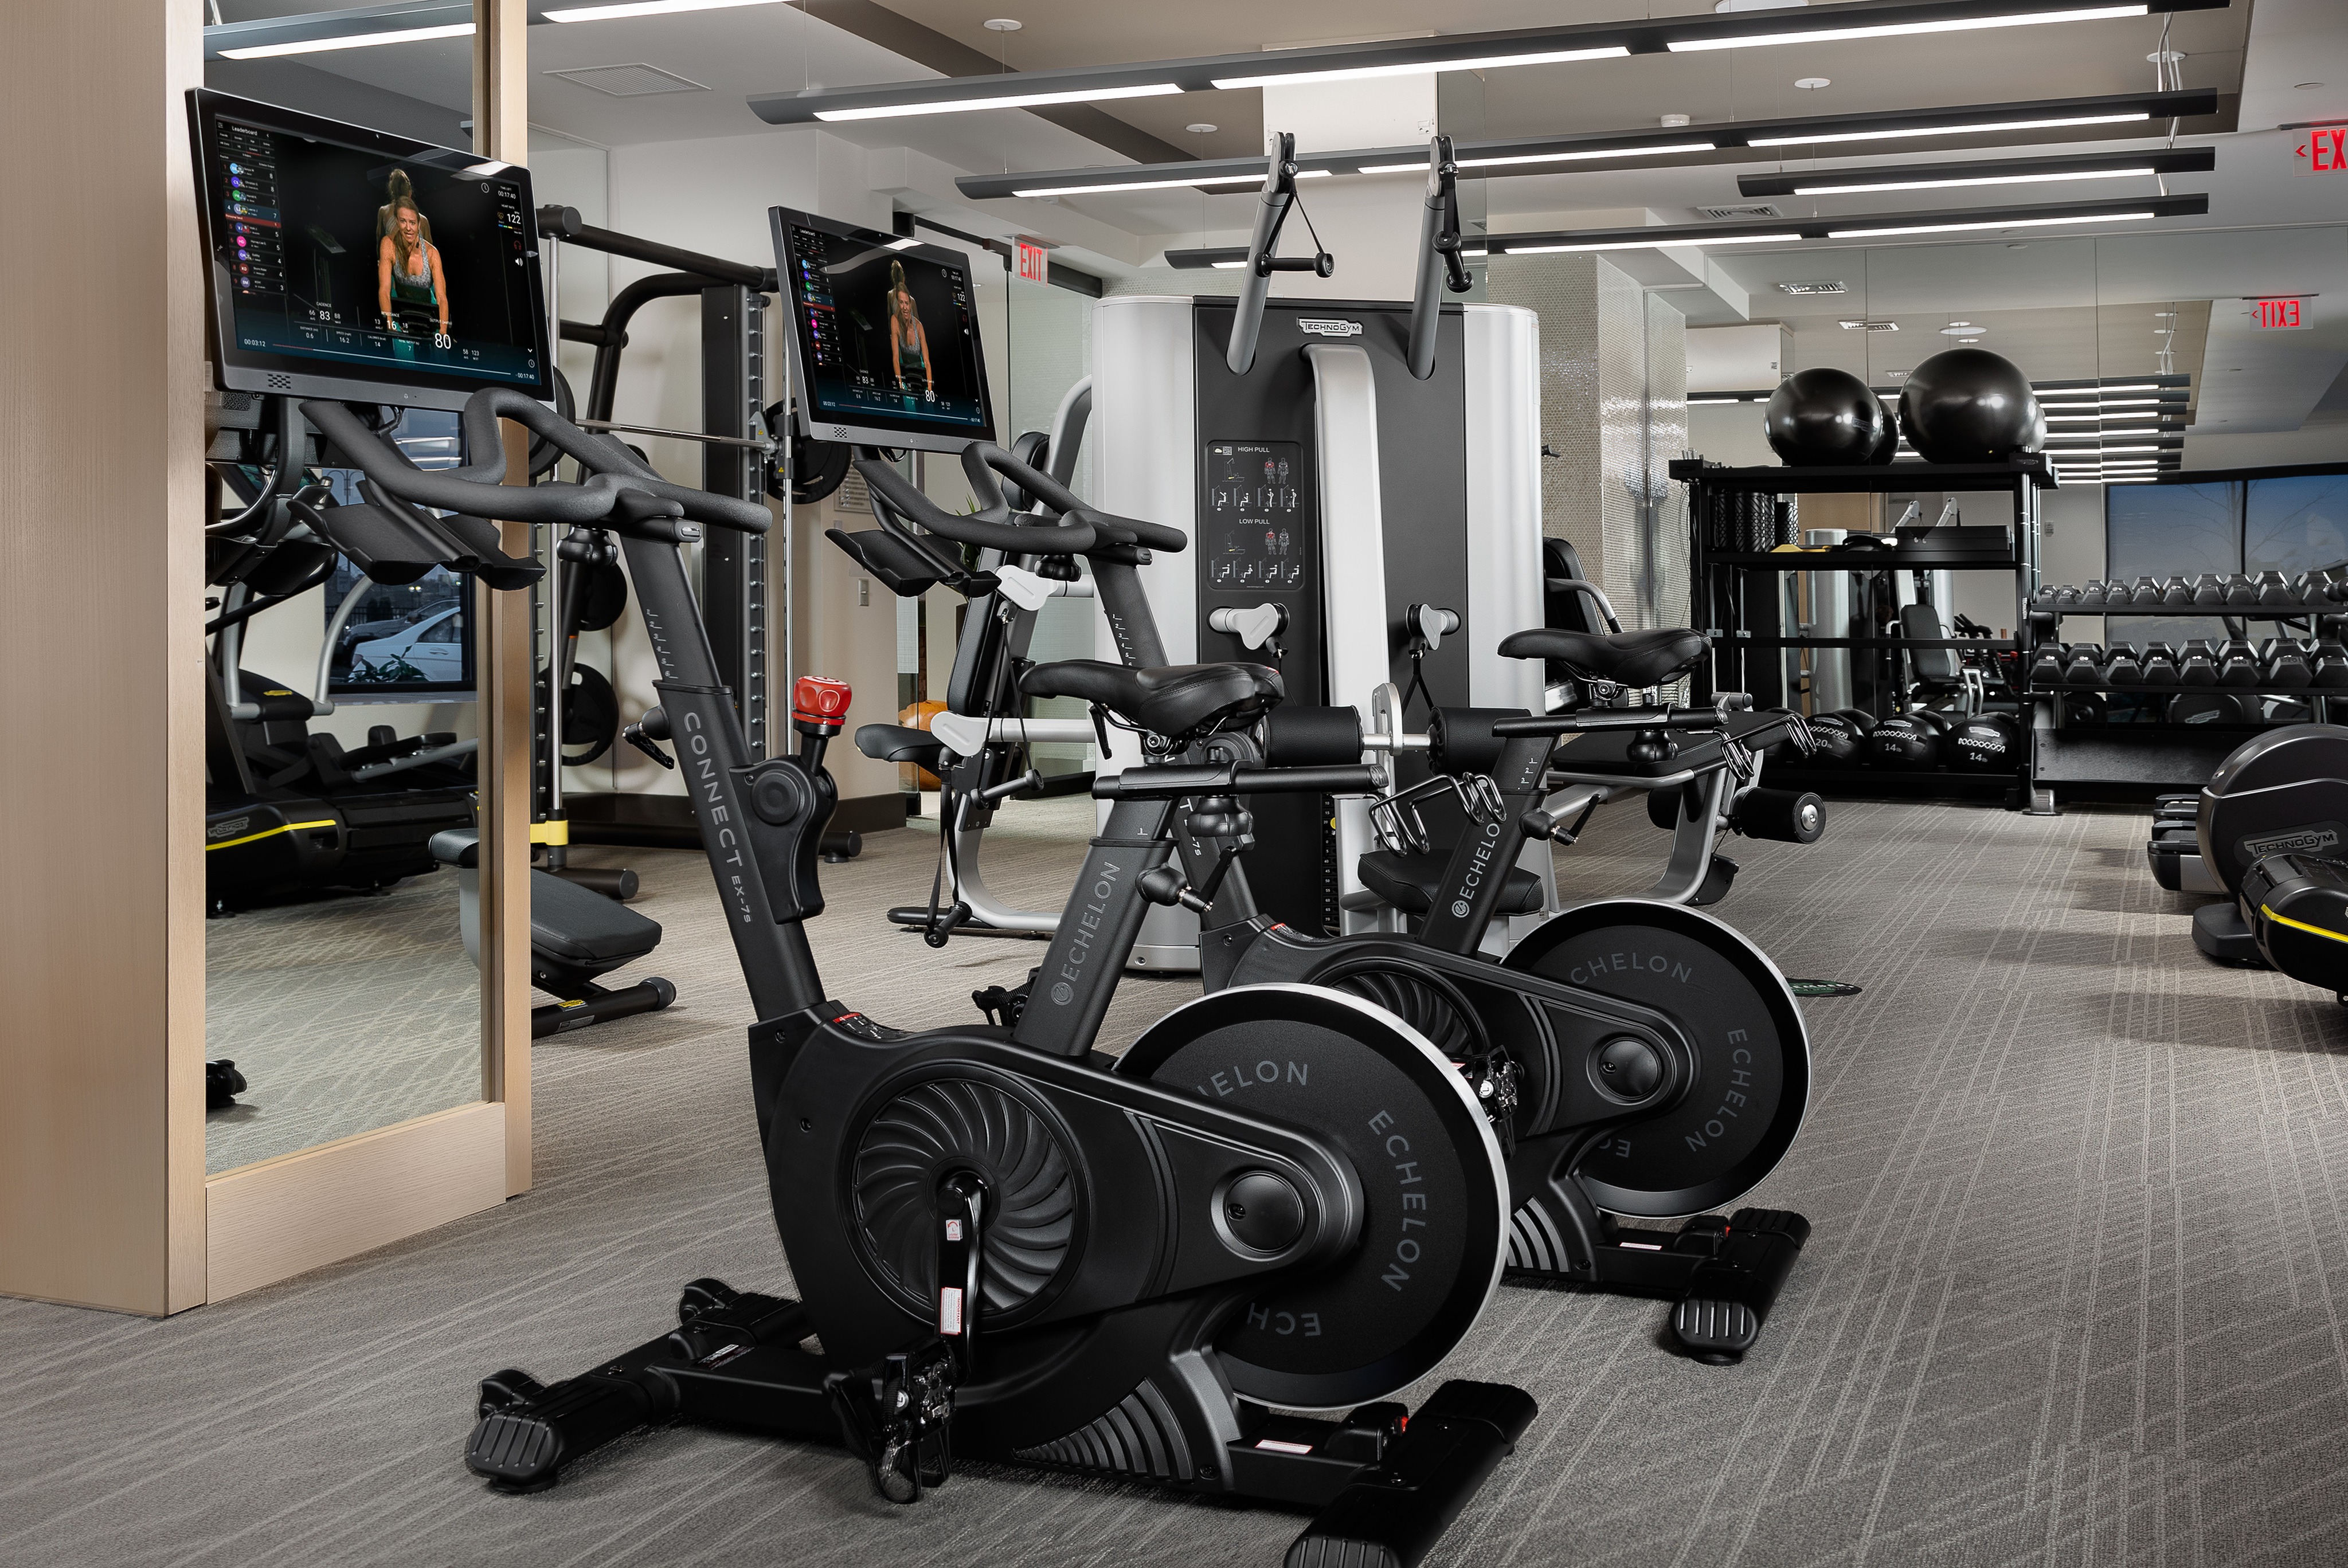 24-hour state-of-the-art fitness center with Echelon Smart Connect Bikes with on-demand classes